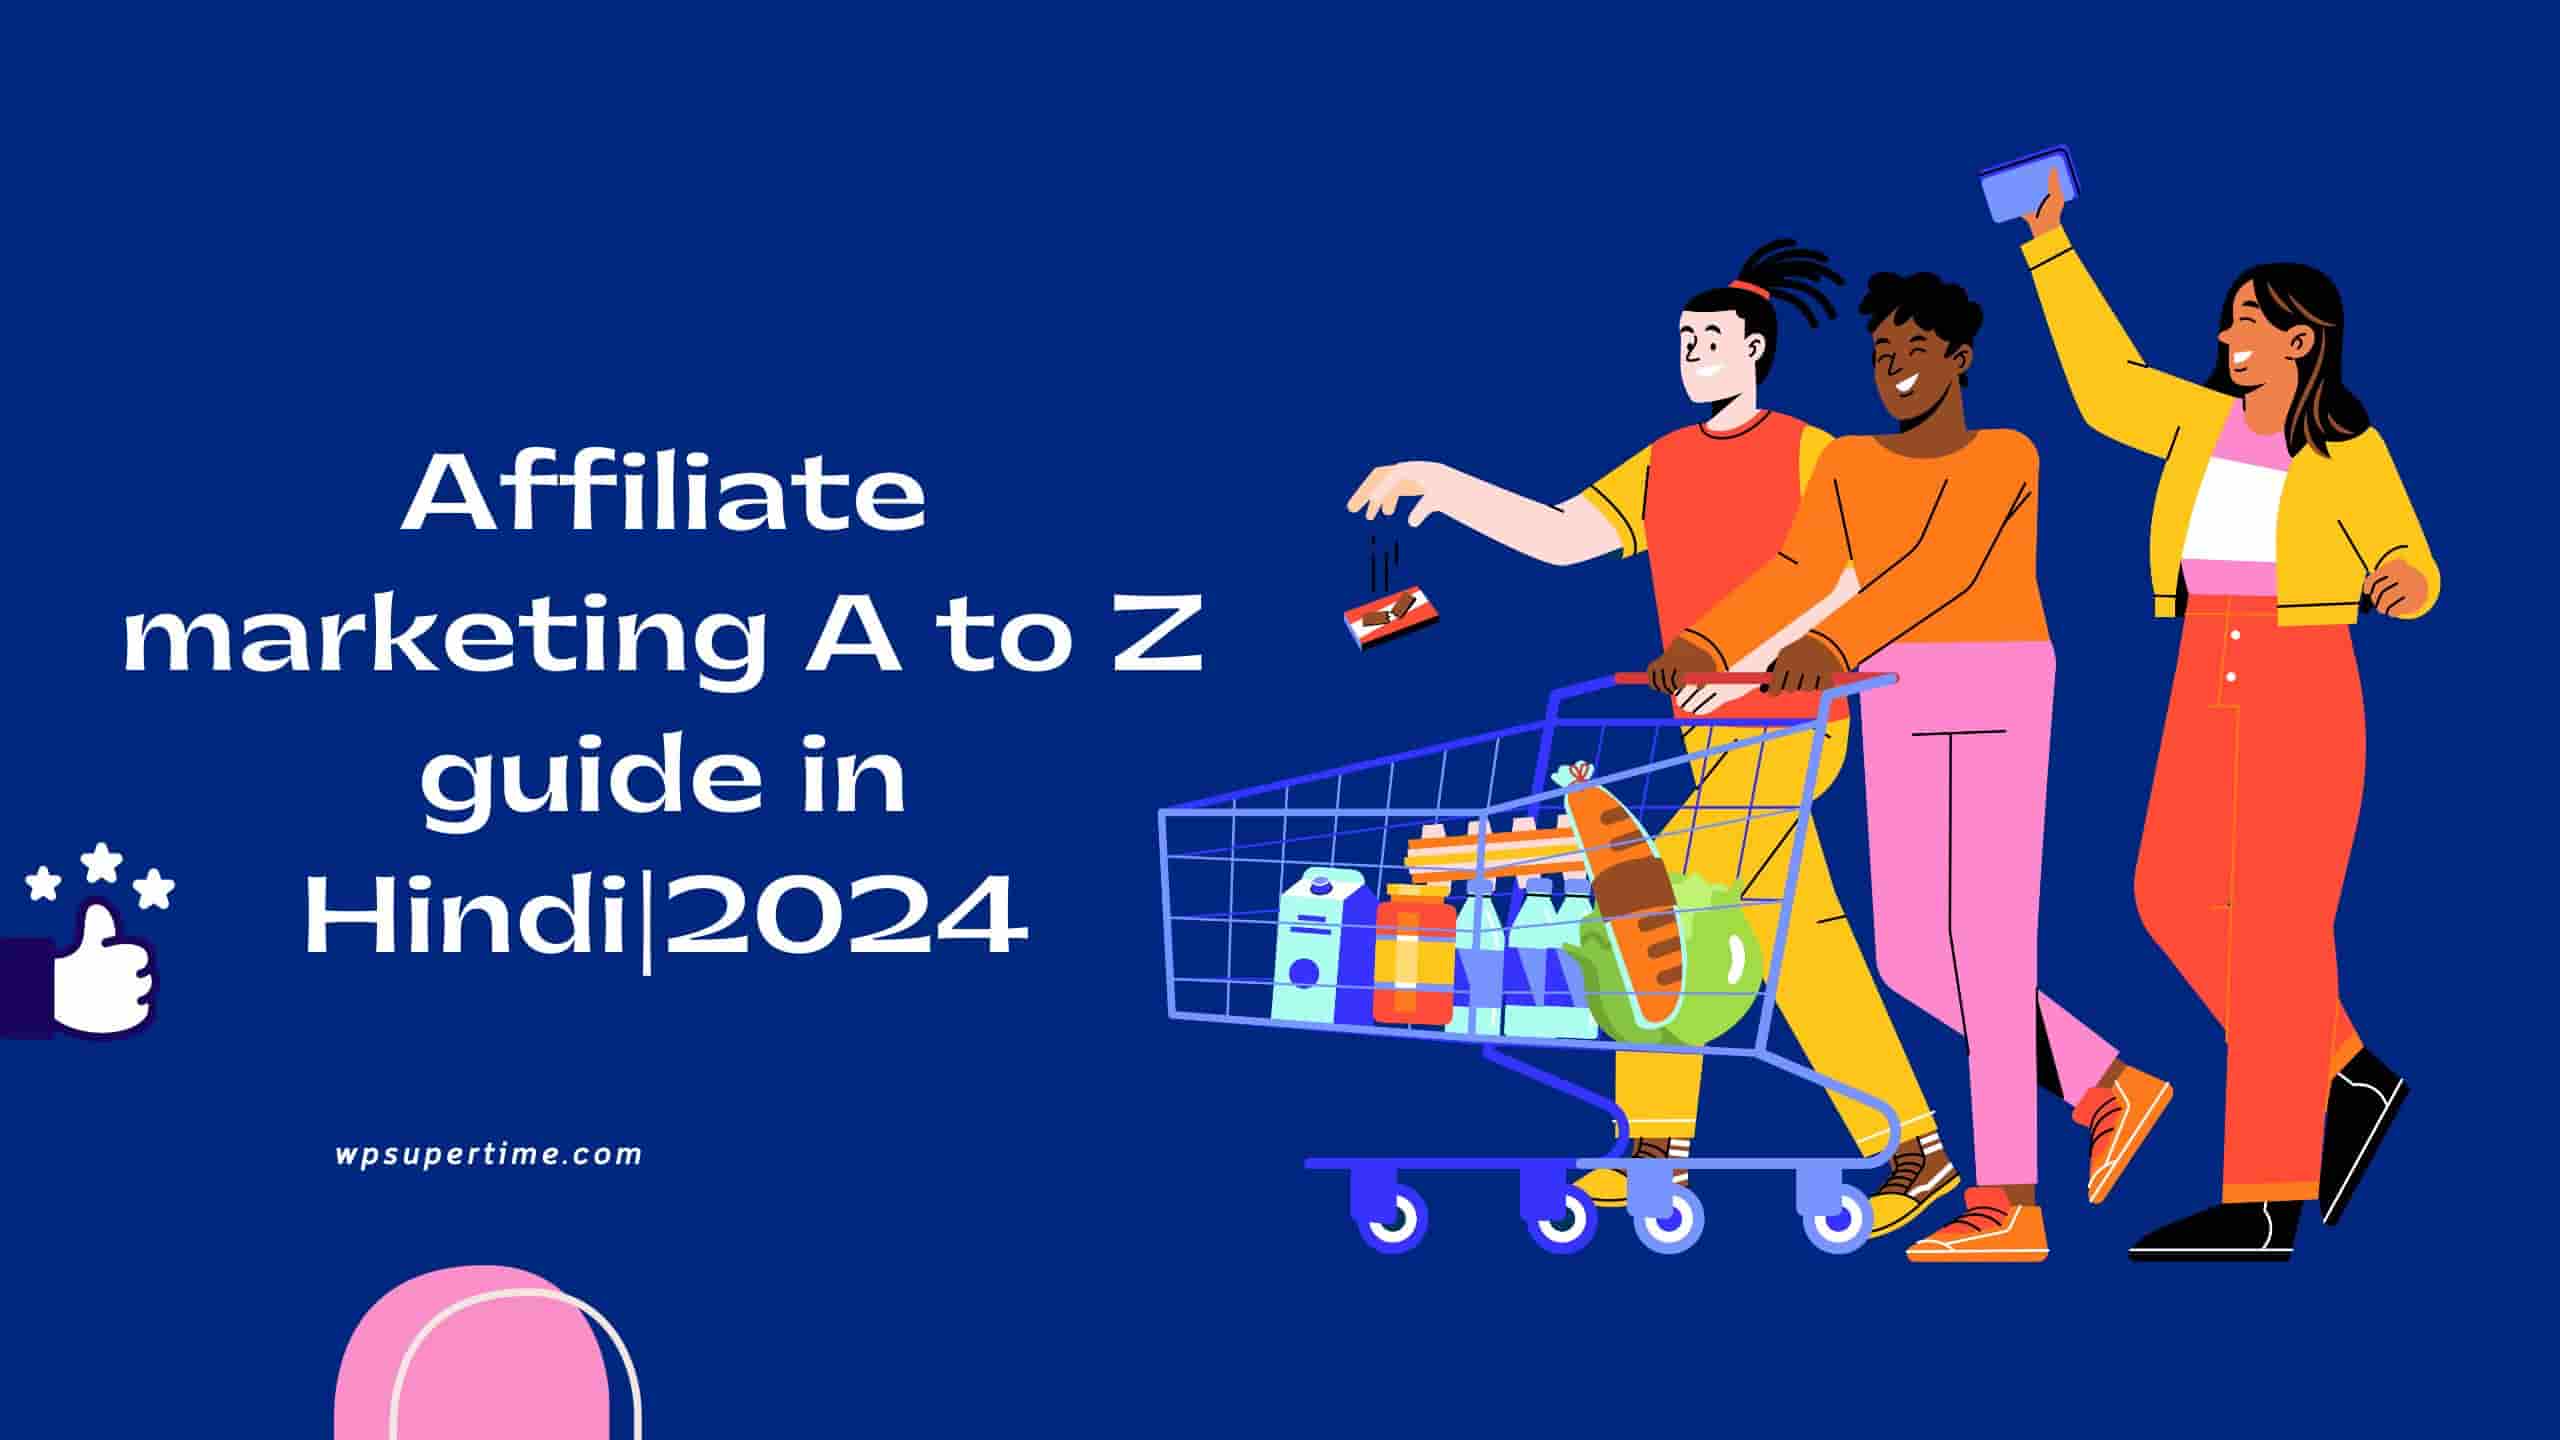 Affiliate marketing A to Z guide in Hindi2024